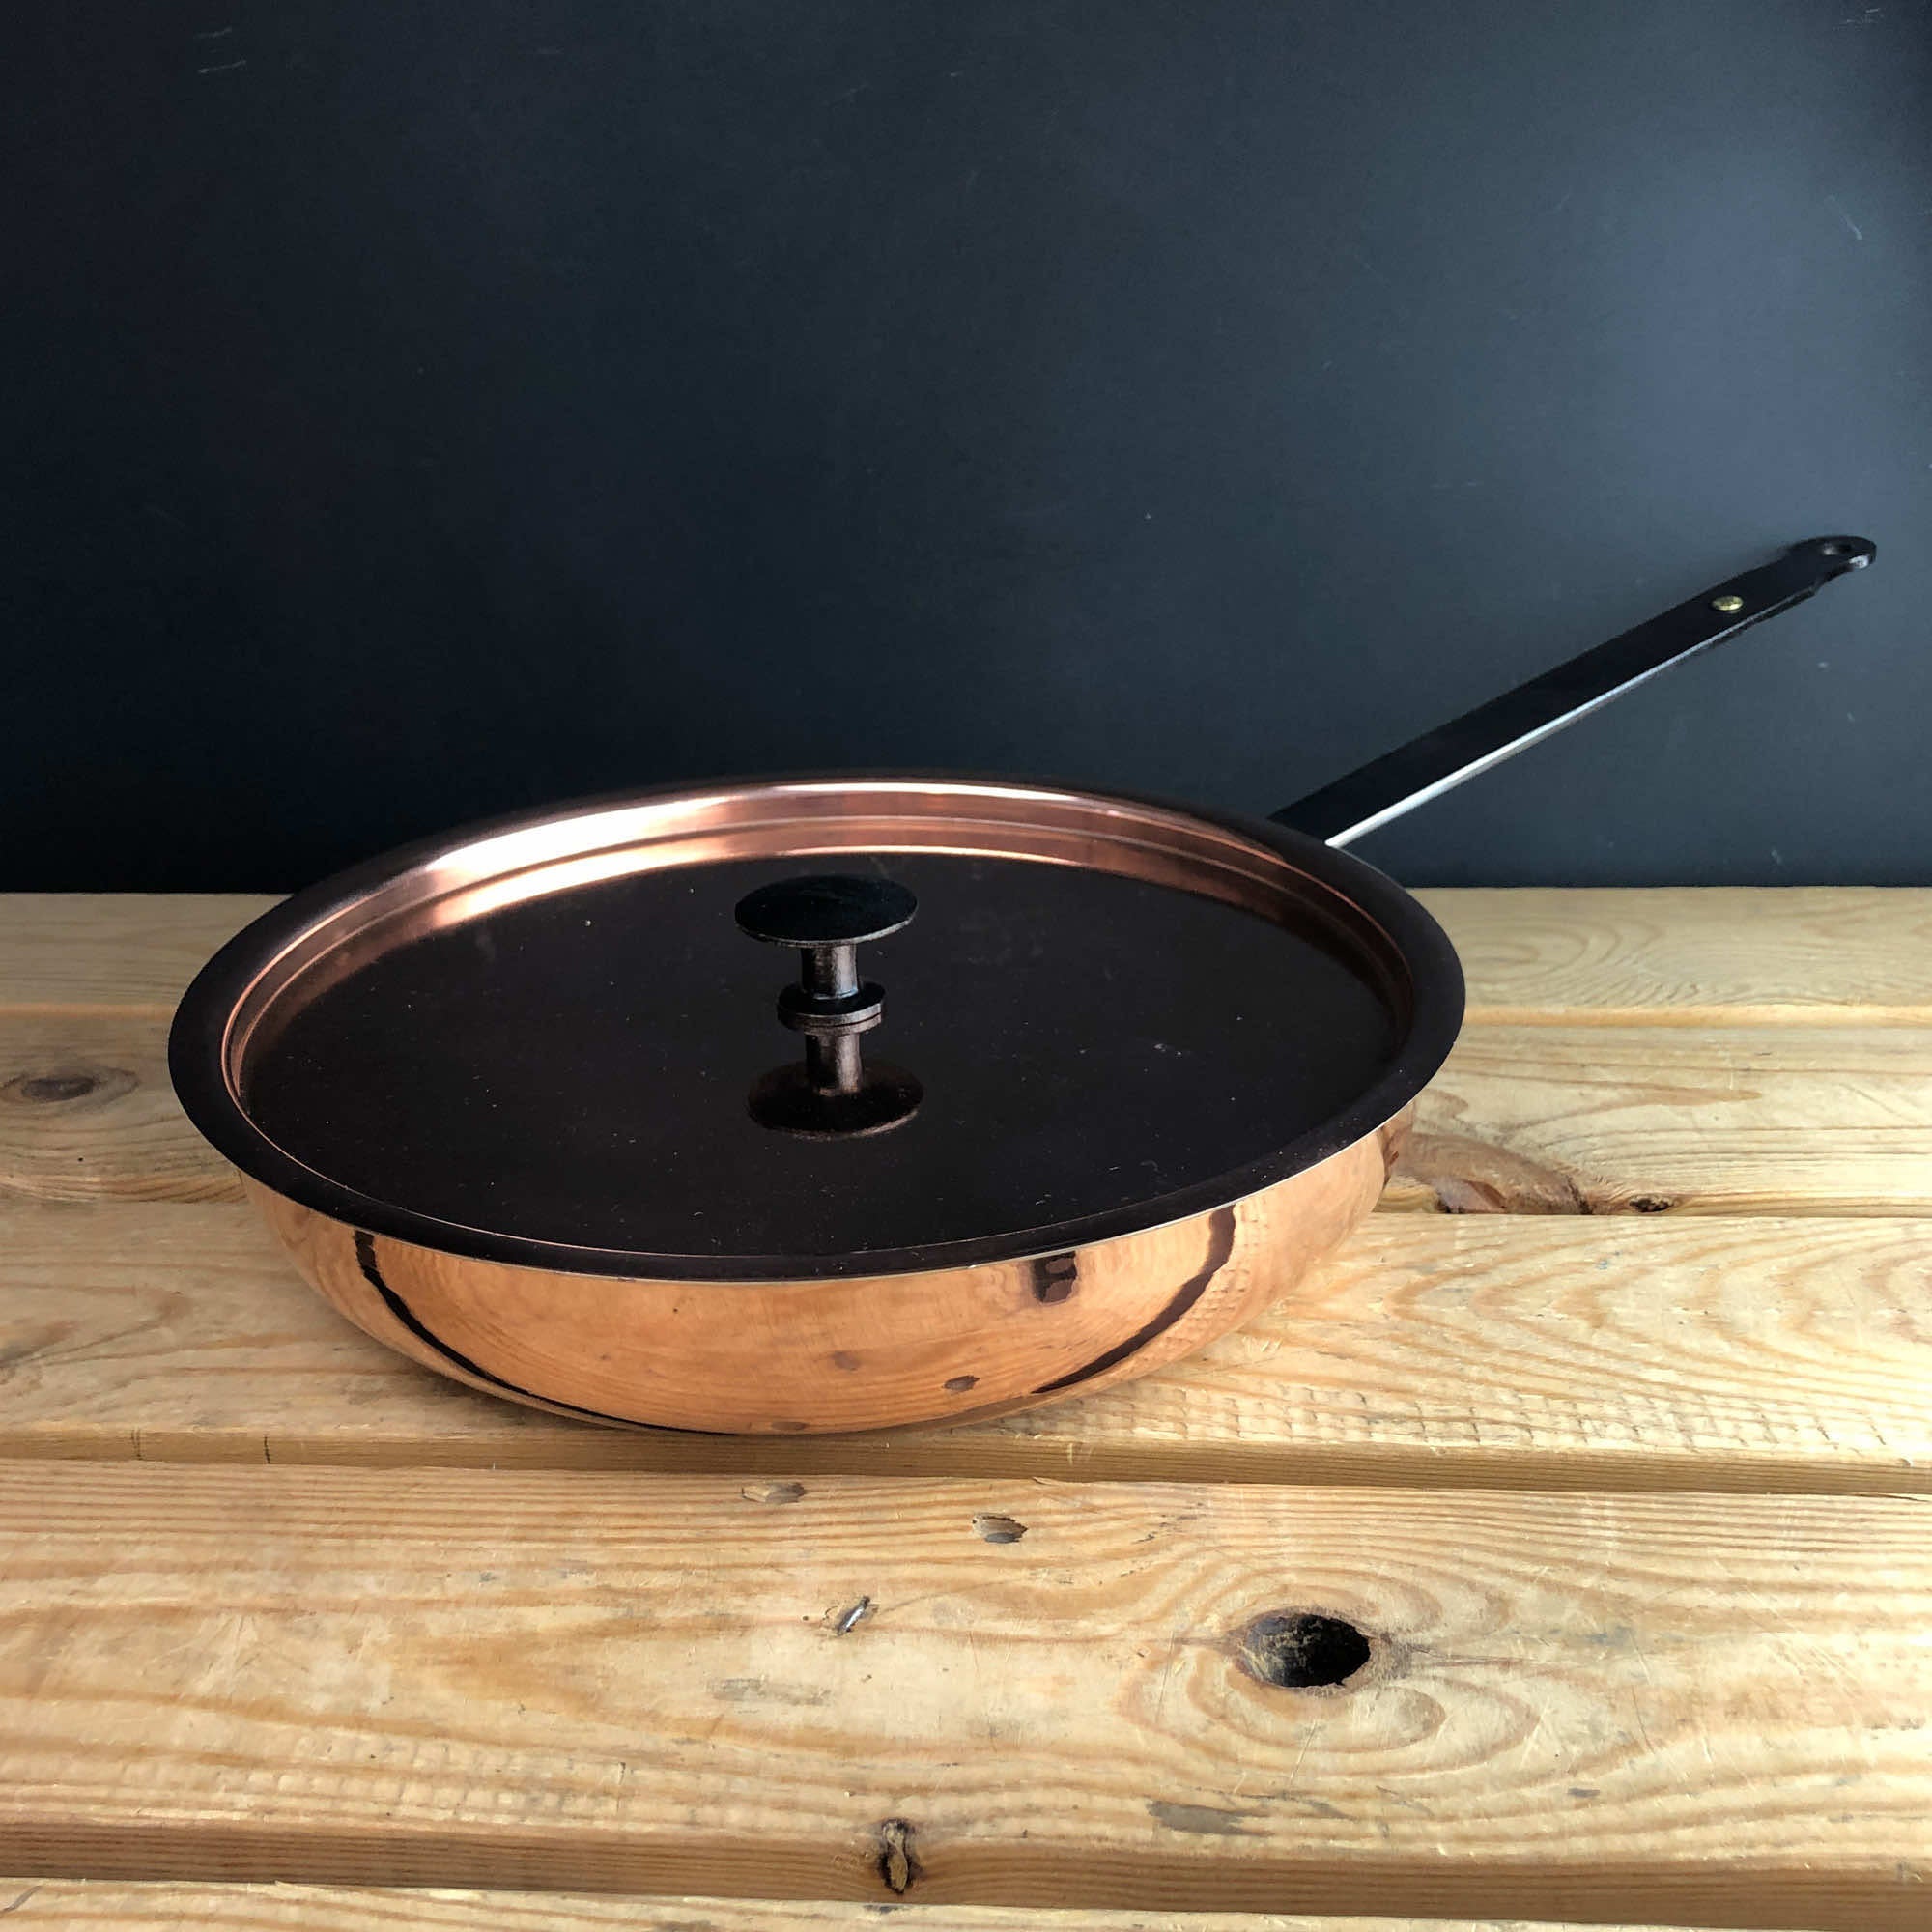 Copper frying pan from above with lid